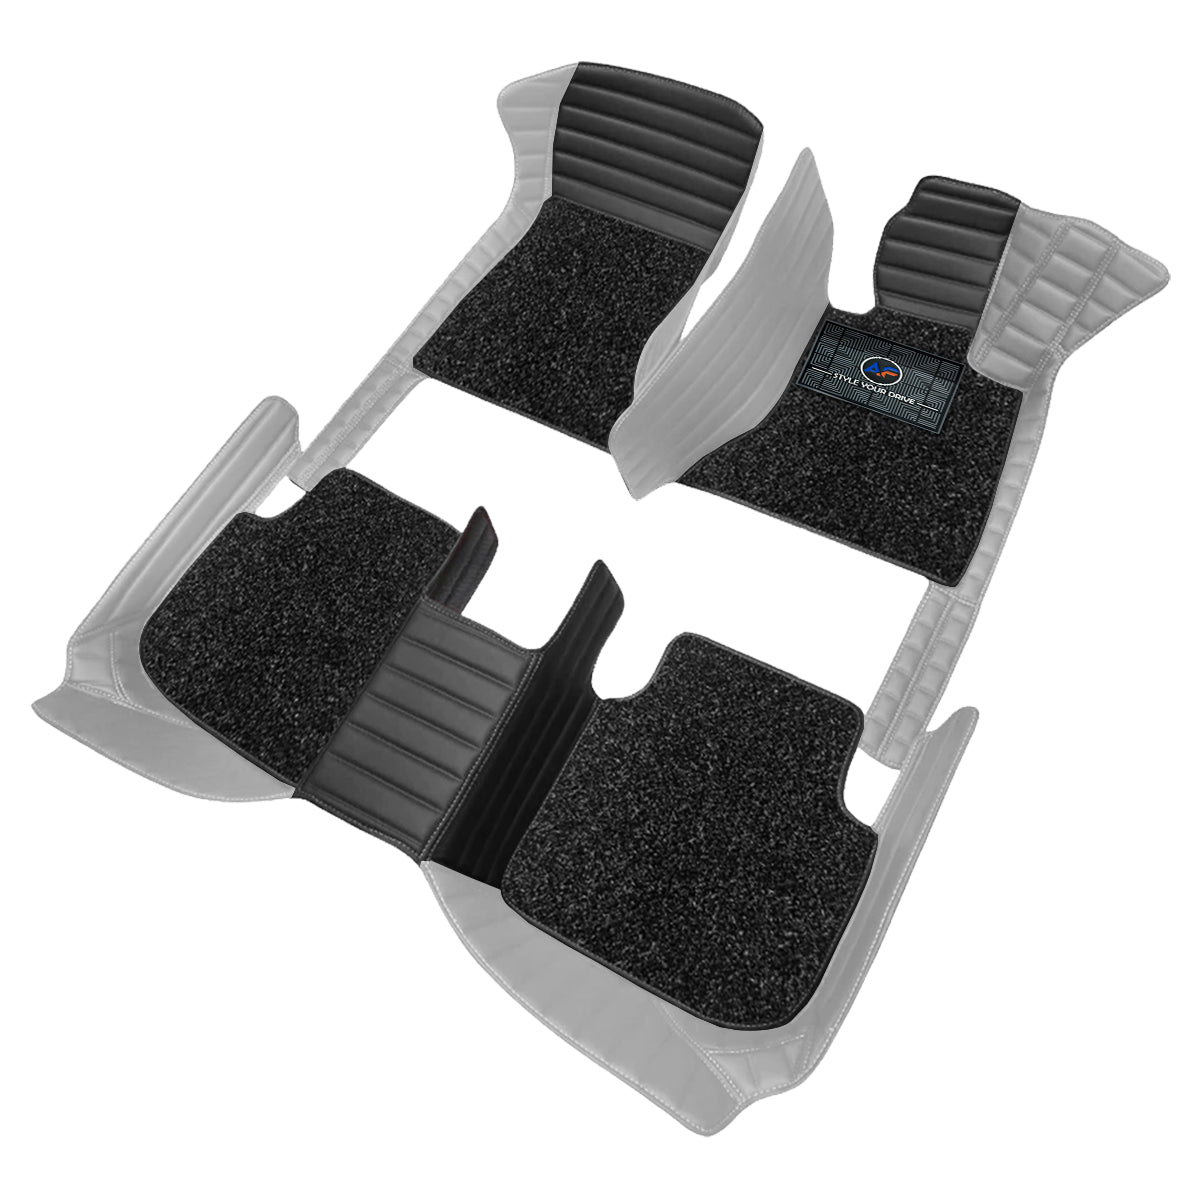 Autofurnish 9D Combination Custom Fitted Car Mats For Land Rover Range Rover Evoque 2020 - Black XV-Greige